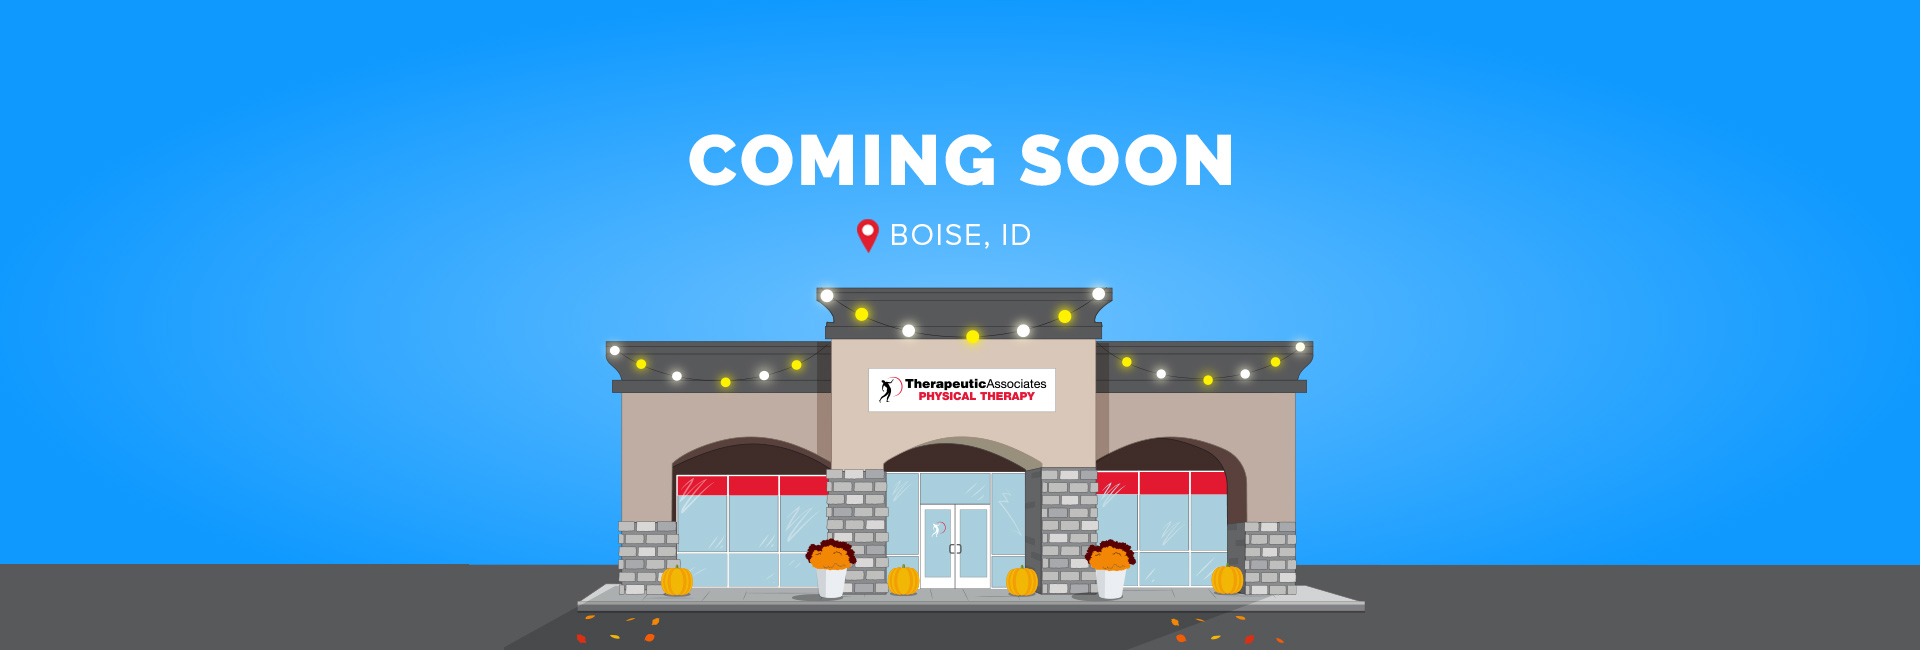 Therapeutic Associates Physical Therapy - NW Boise - Coming Soon